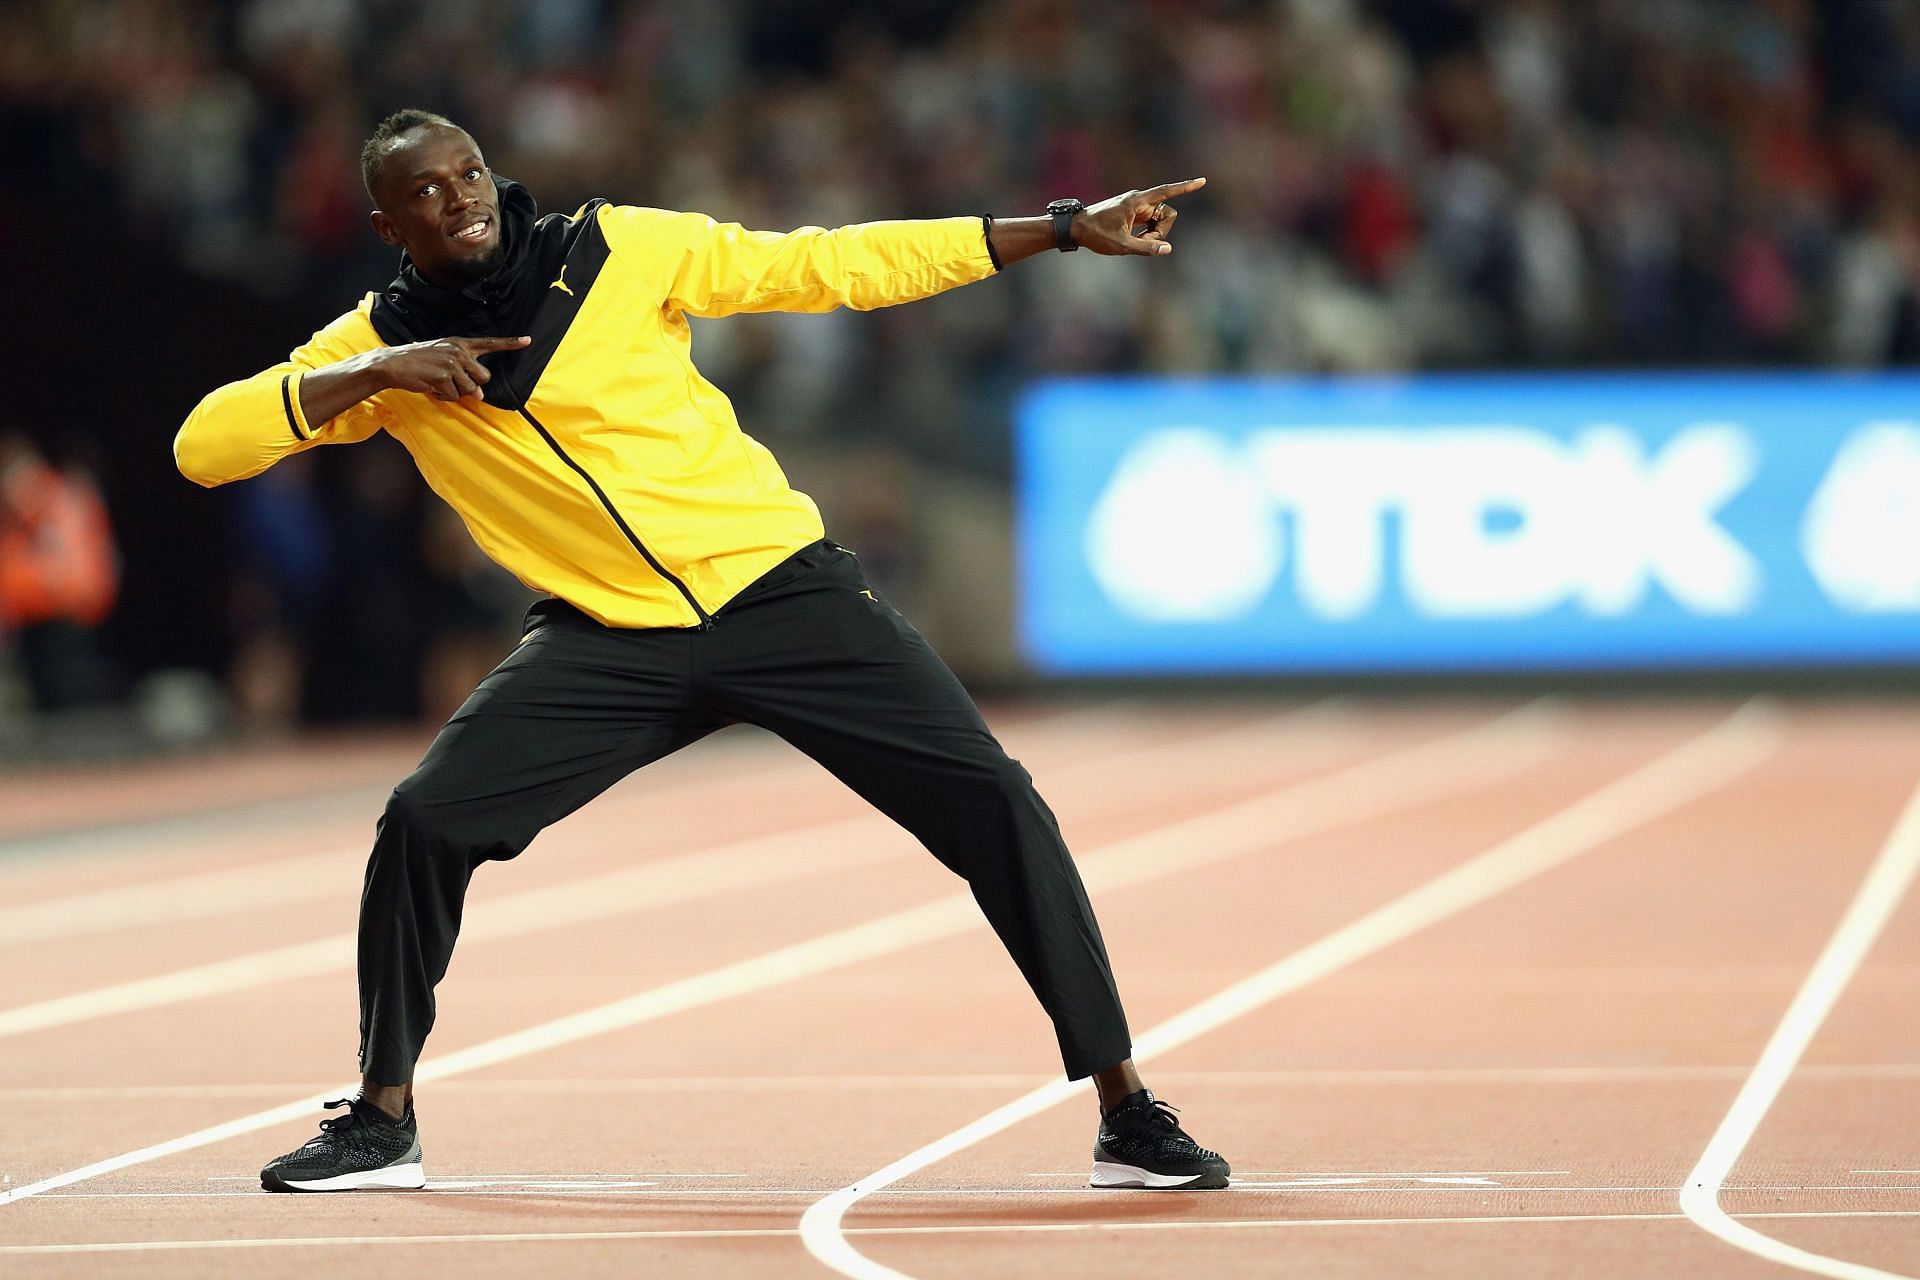 Usain Bolt of Jamaica bids farewell to fans after his last World Athletics Championships 